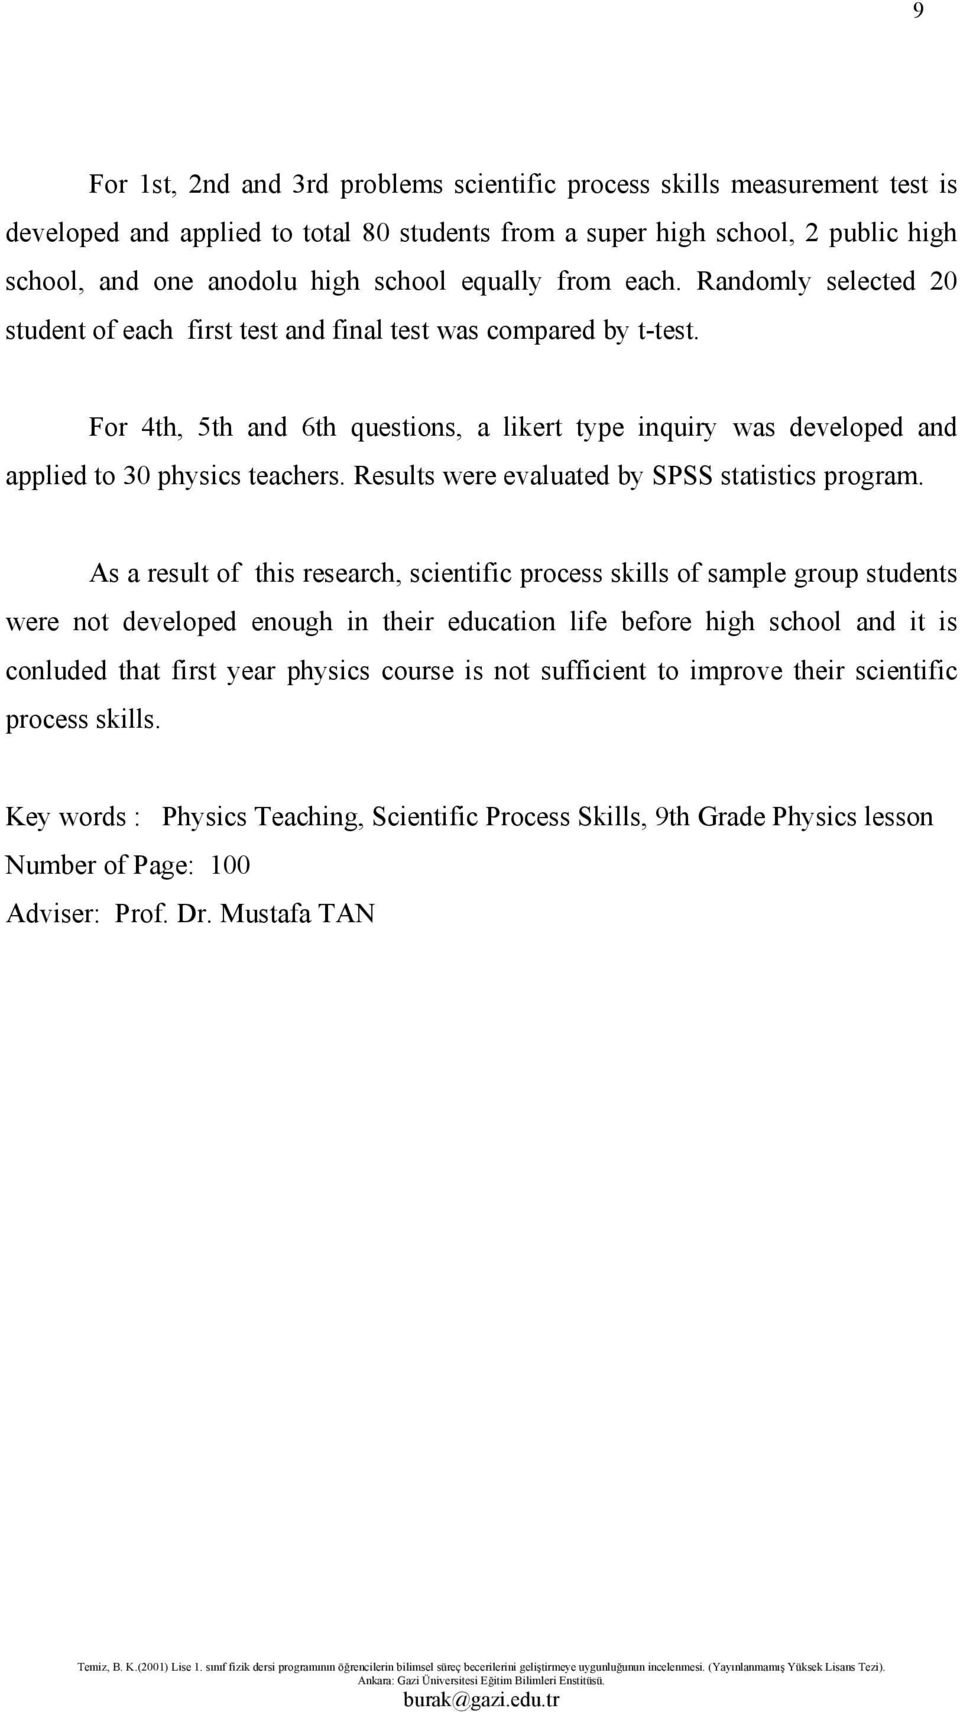 For 4th, 5th and 6th questions, a likert type inquiry was developed and applied to 30 physics teachers. Results were evaluated by SPSS statistics program.